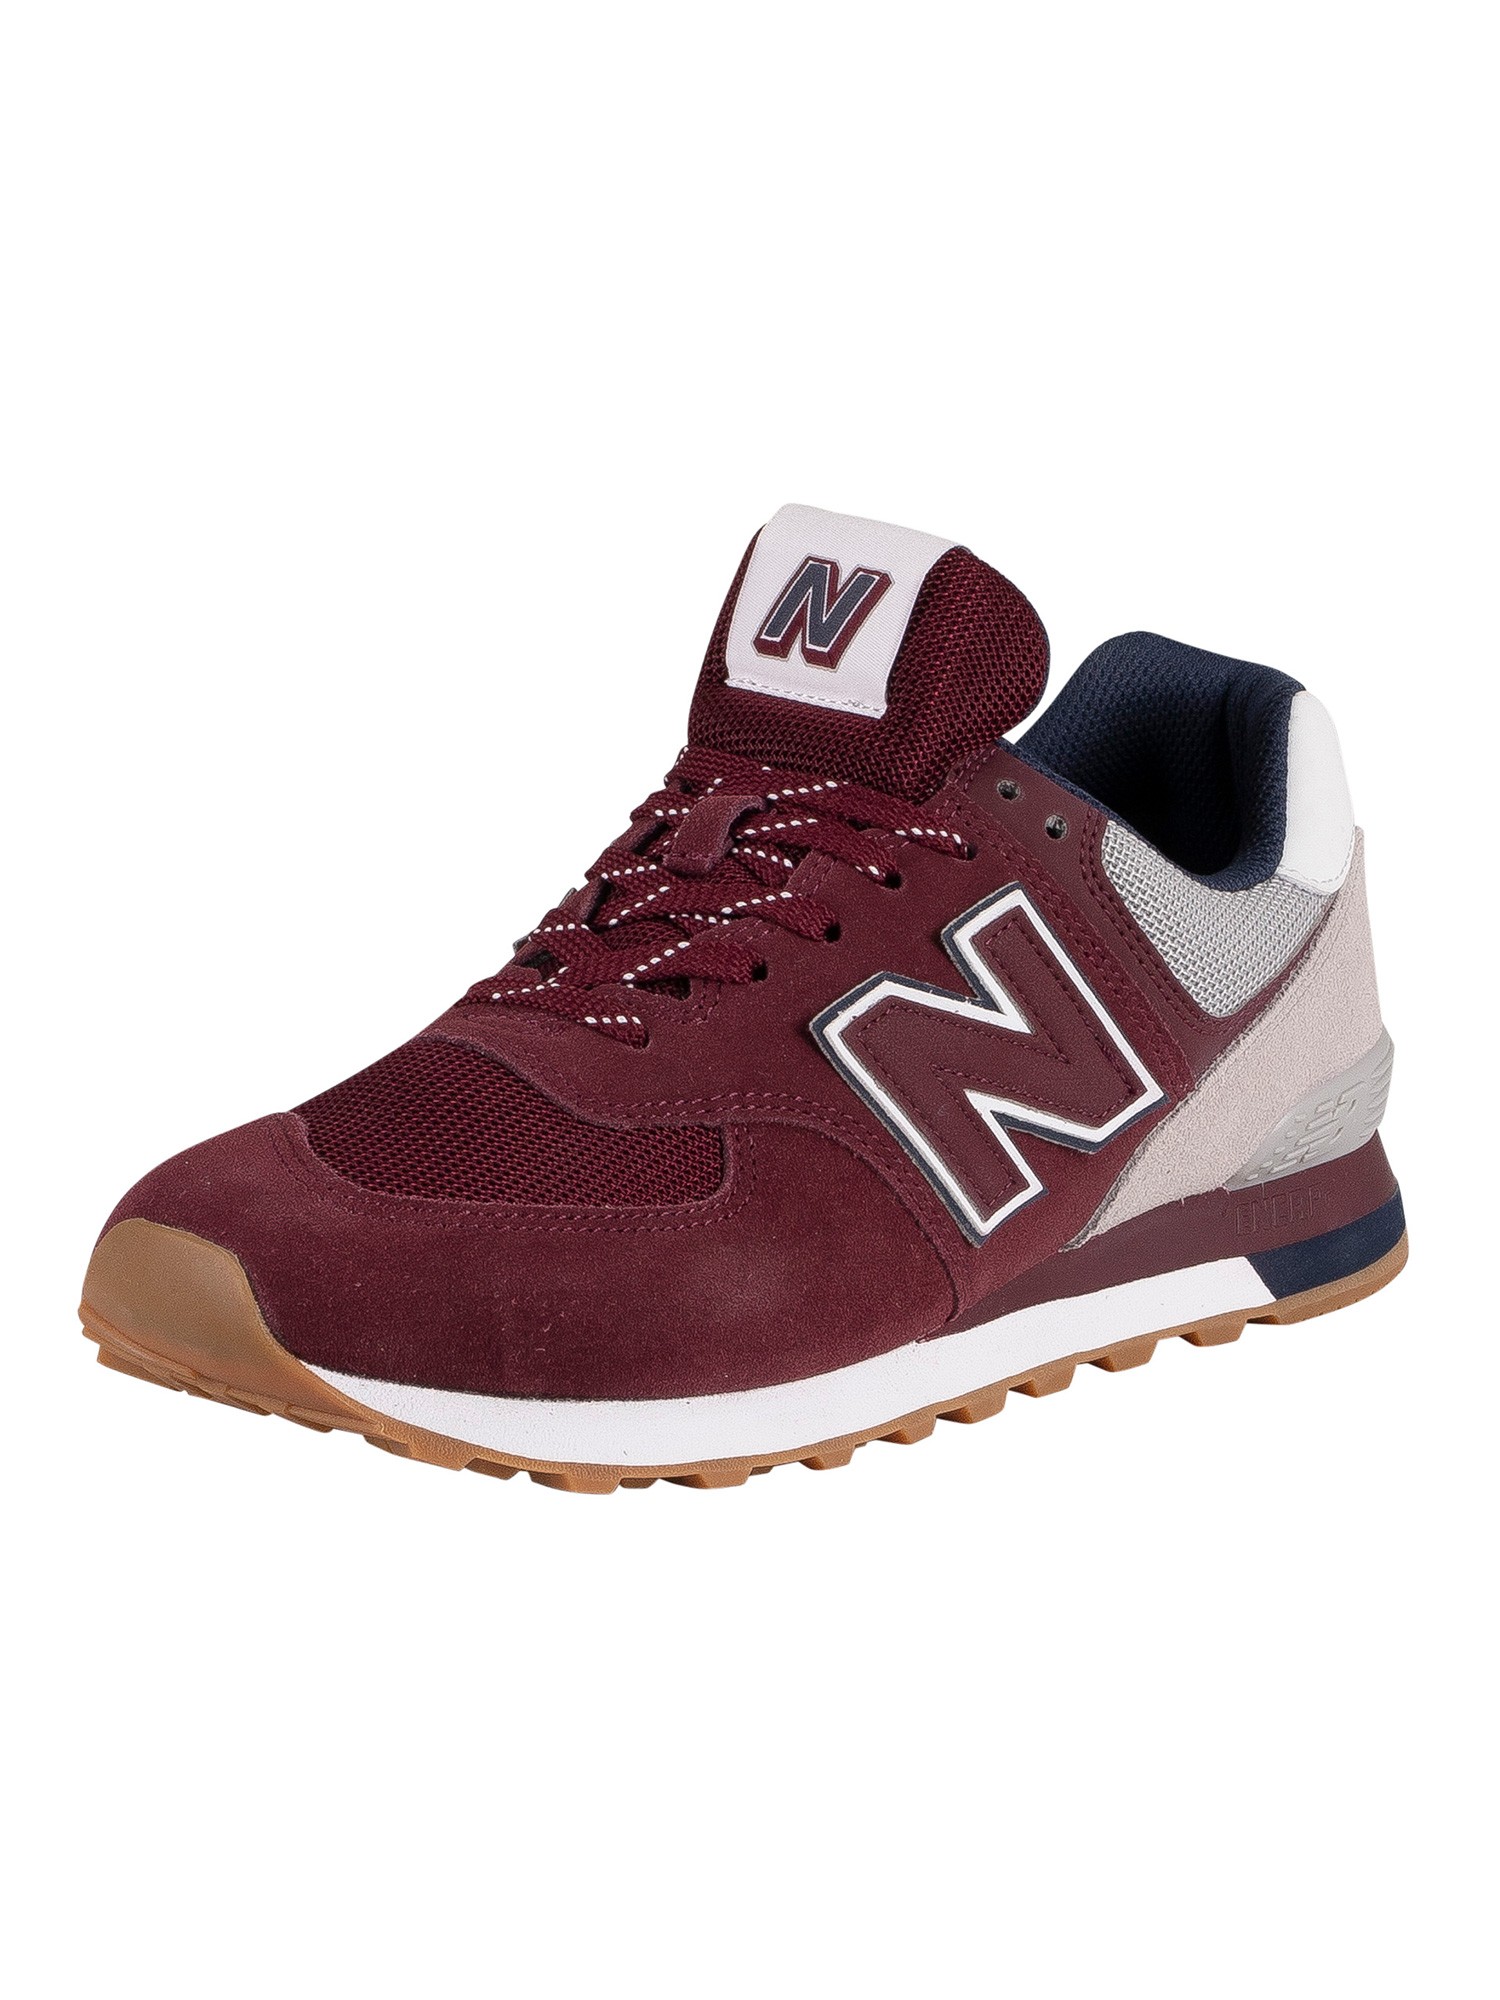 New Balance 574 Suede Trainers - Burgundy | Standout